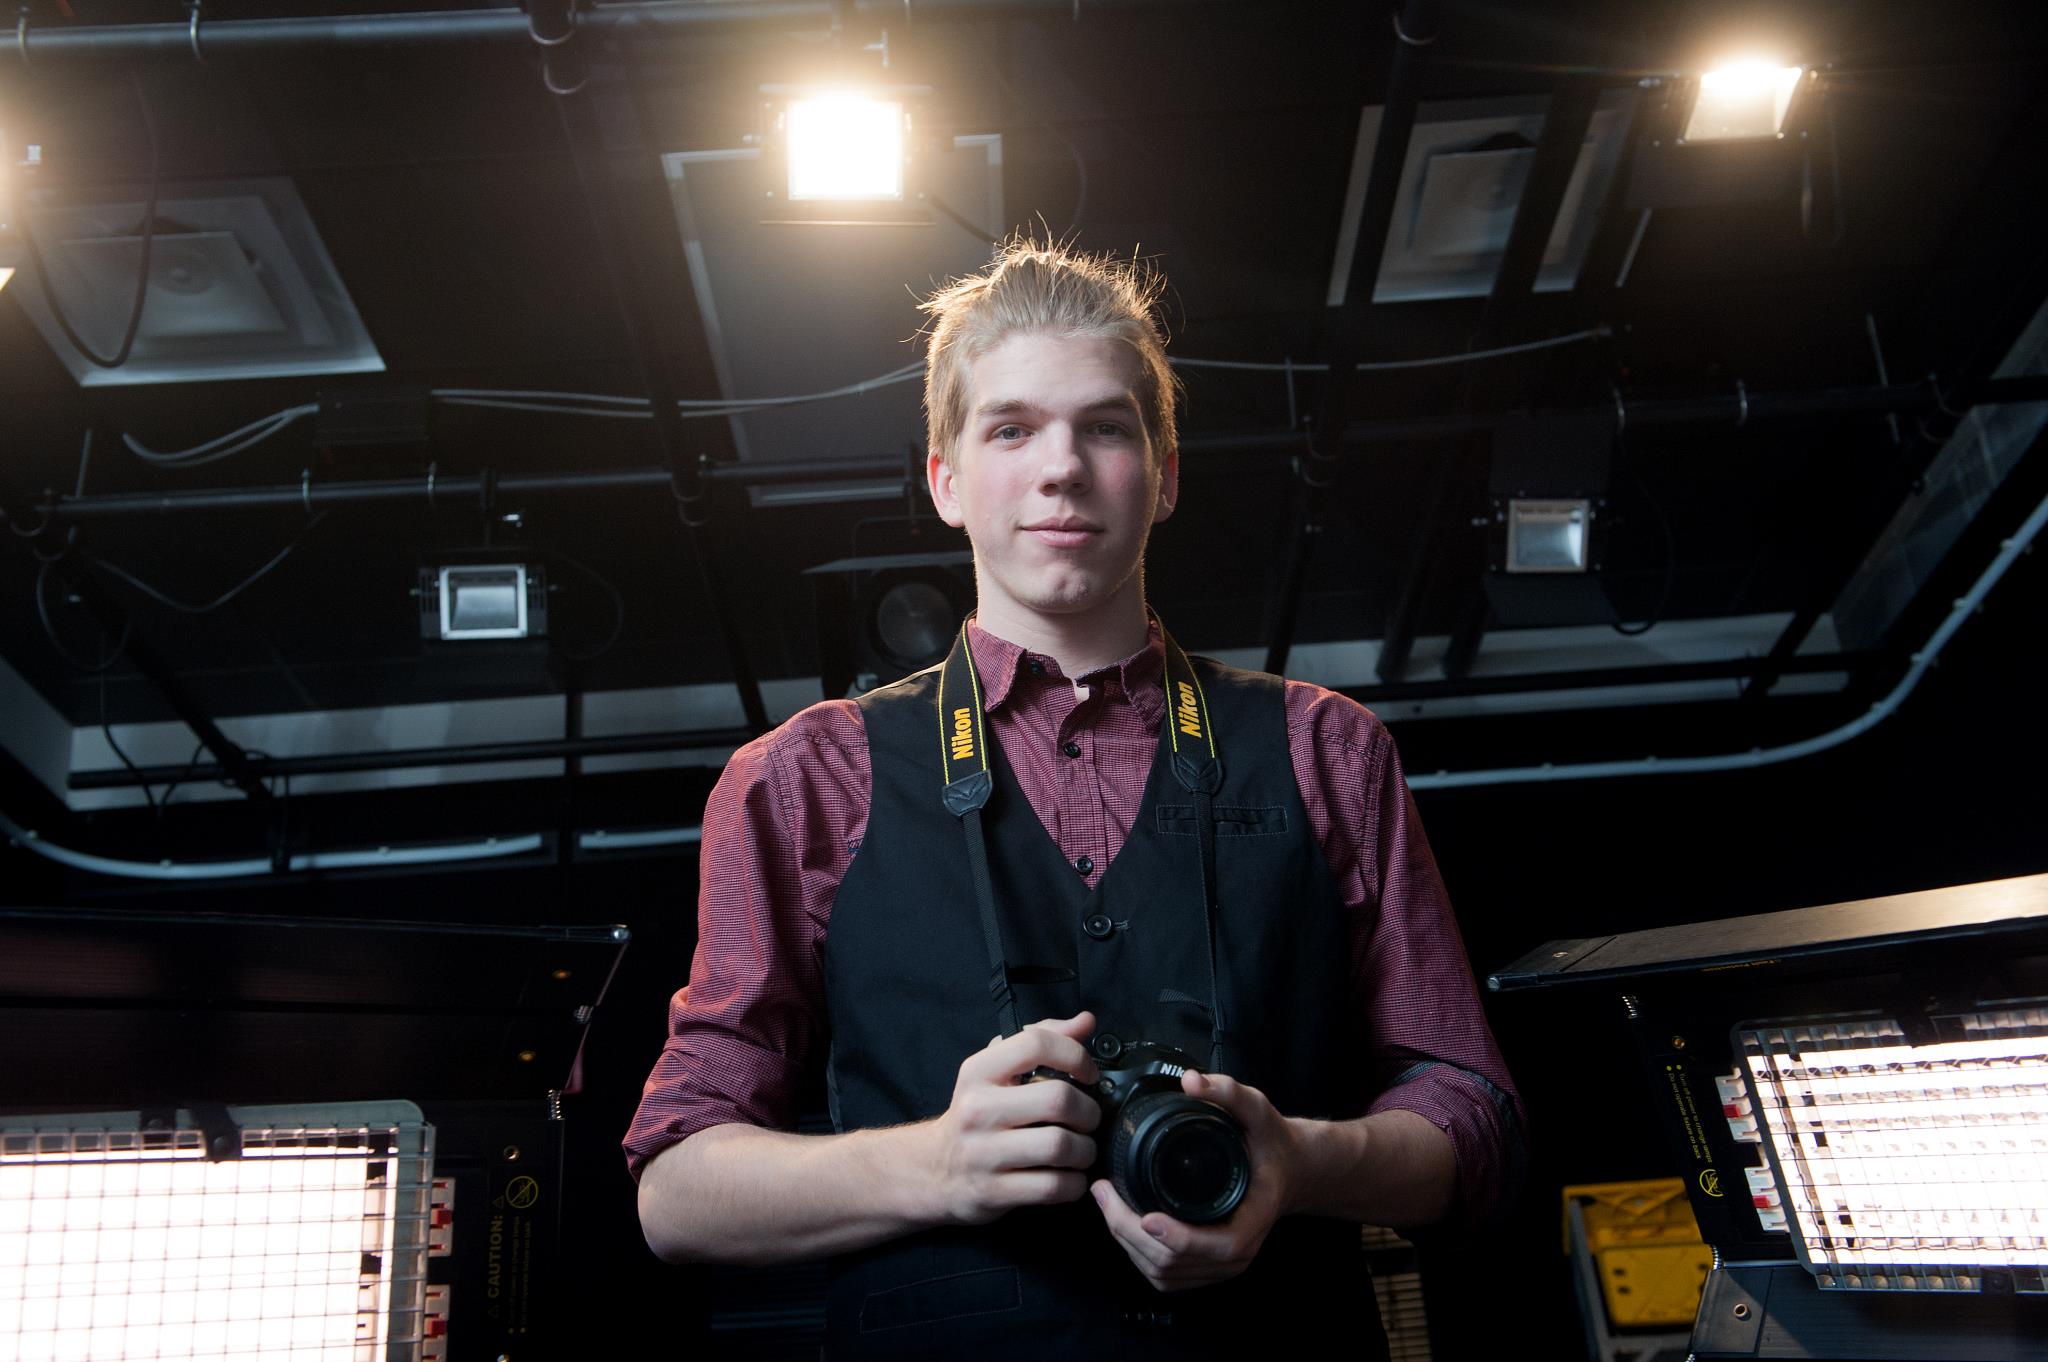 Male New Media student holding his camera in the photography studio